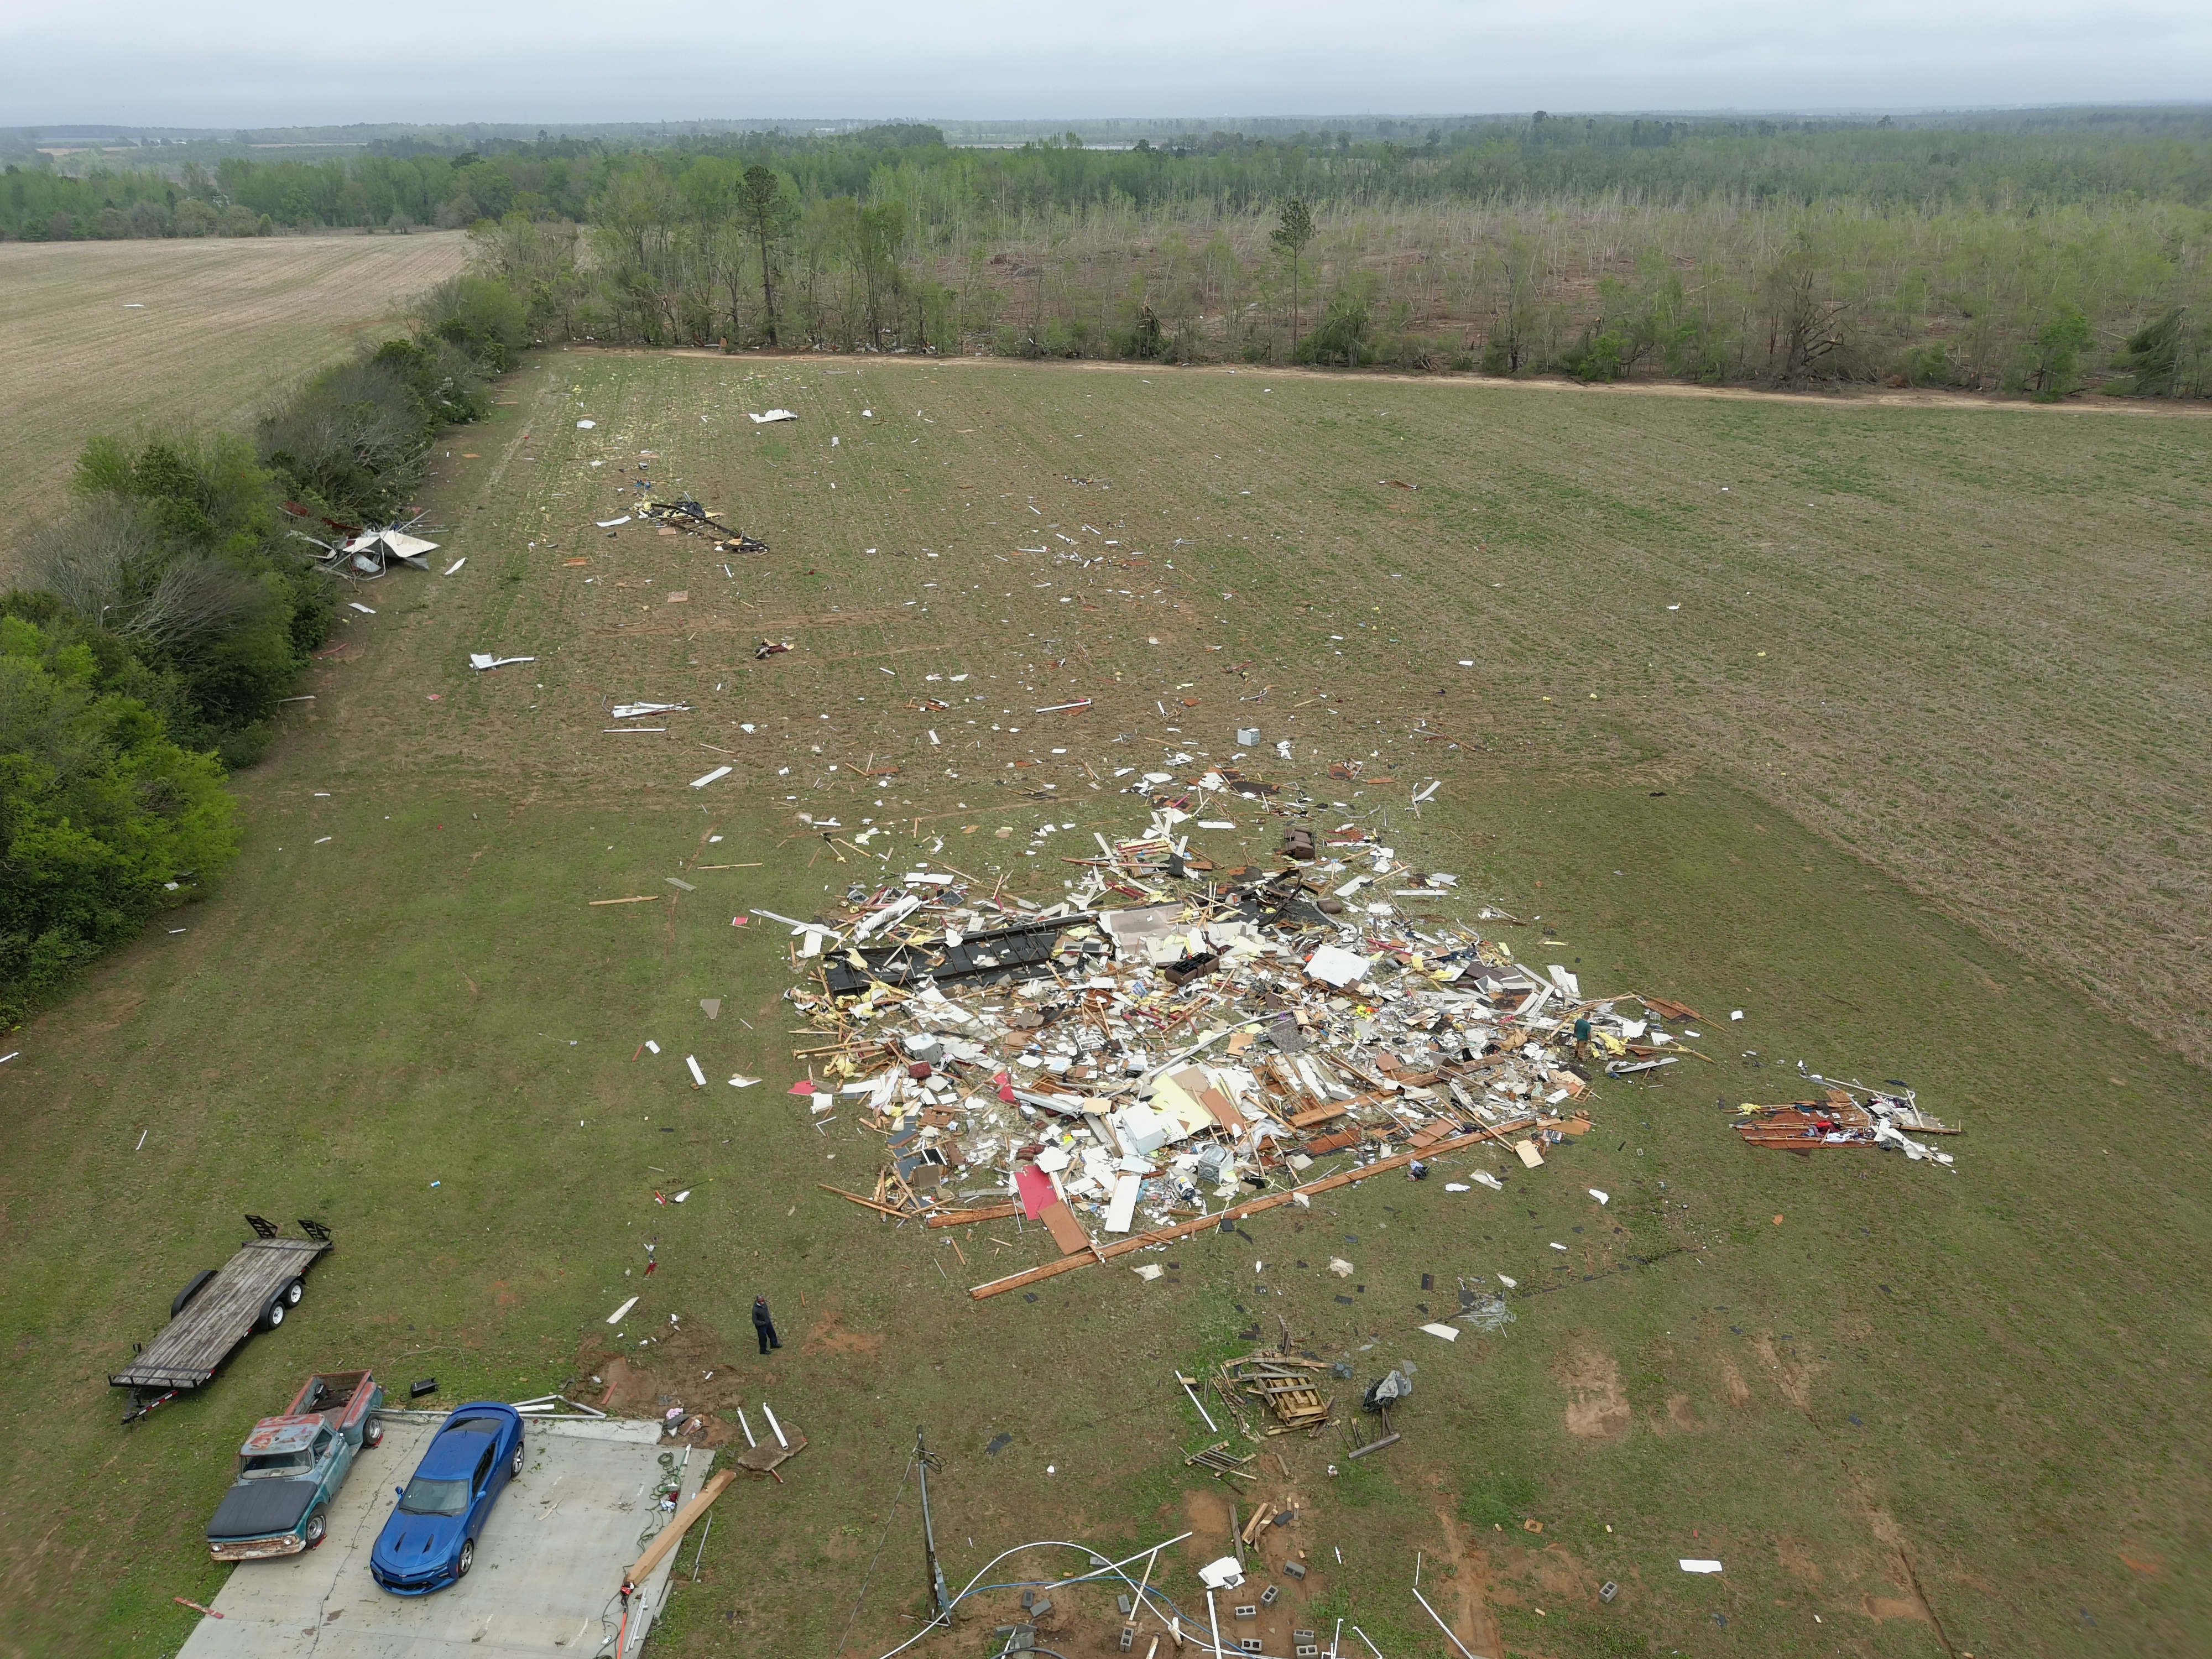 A mobile home that was completely destroyed at low-end EF3 intensity south of Allendale, South Carolina.